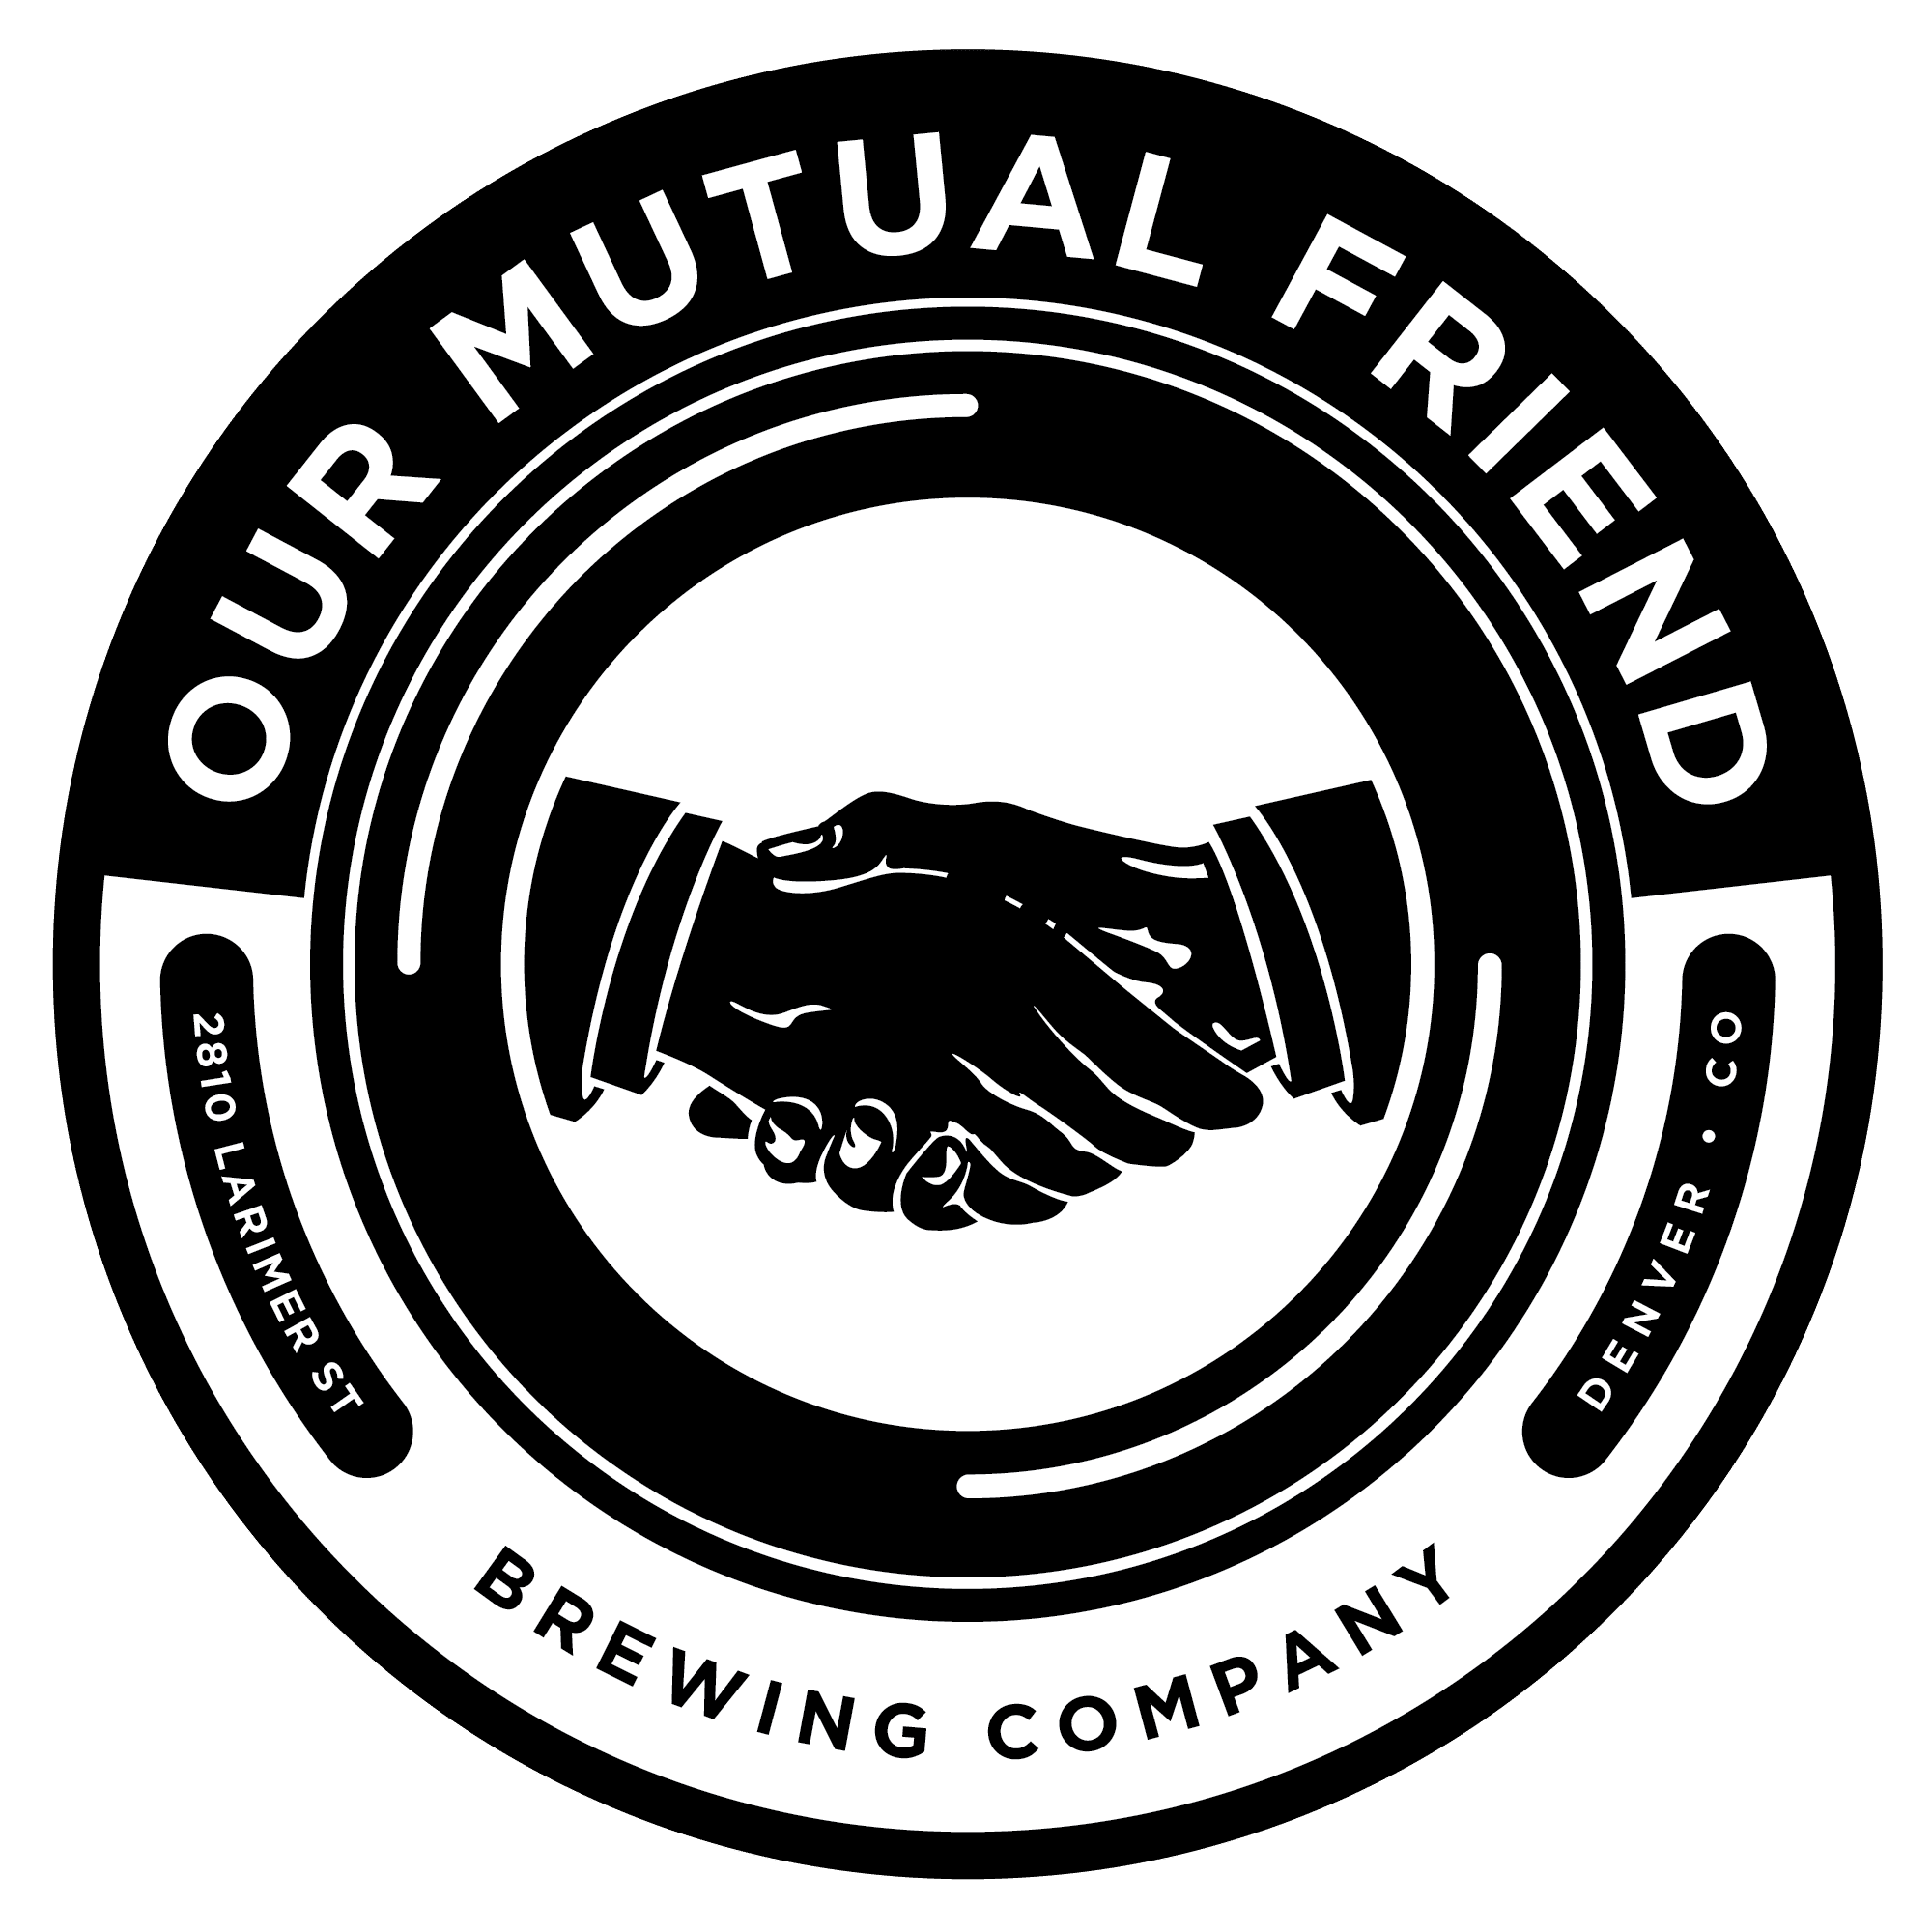 Our Mutual Friend Tap Feature